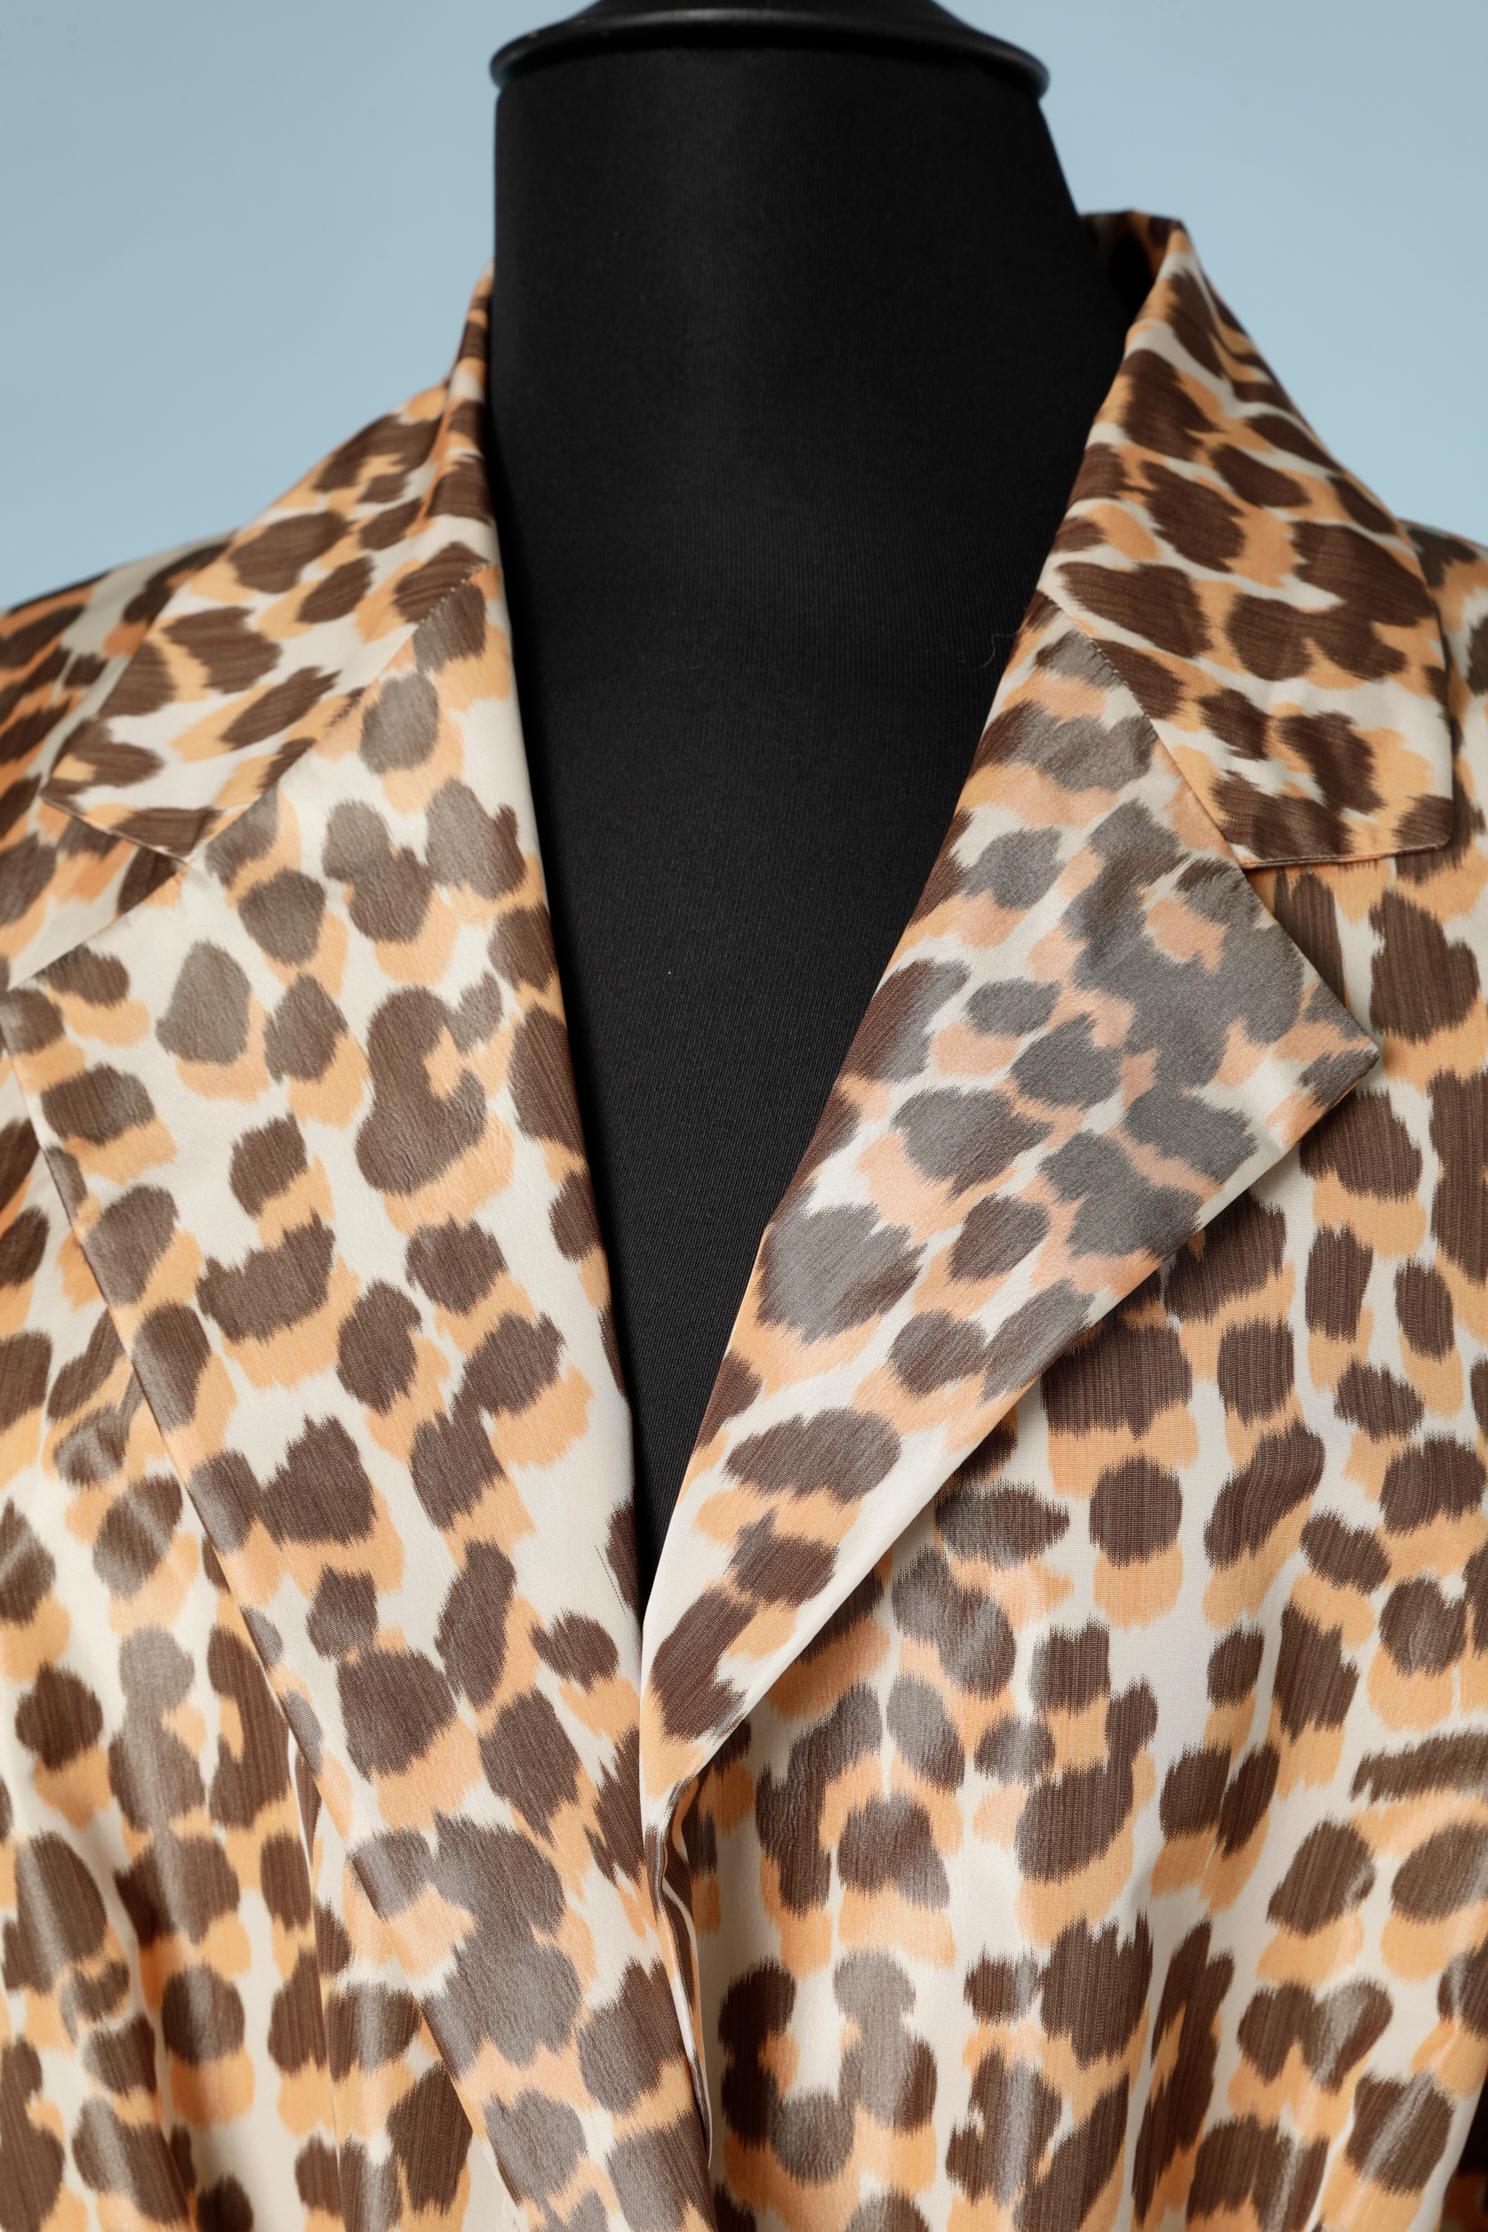 Leopard printed Trench-coat with belt. 
SIZE 38 ( Fr)  ( but fit L because oversize shape)